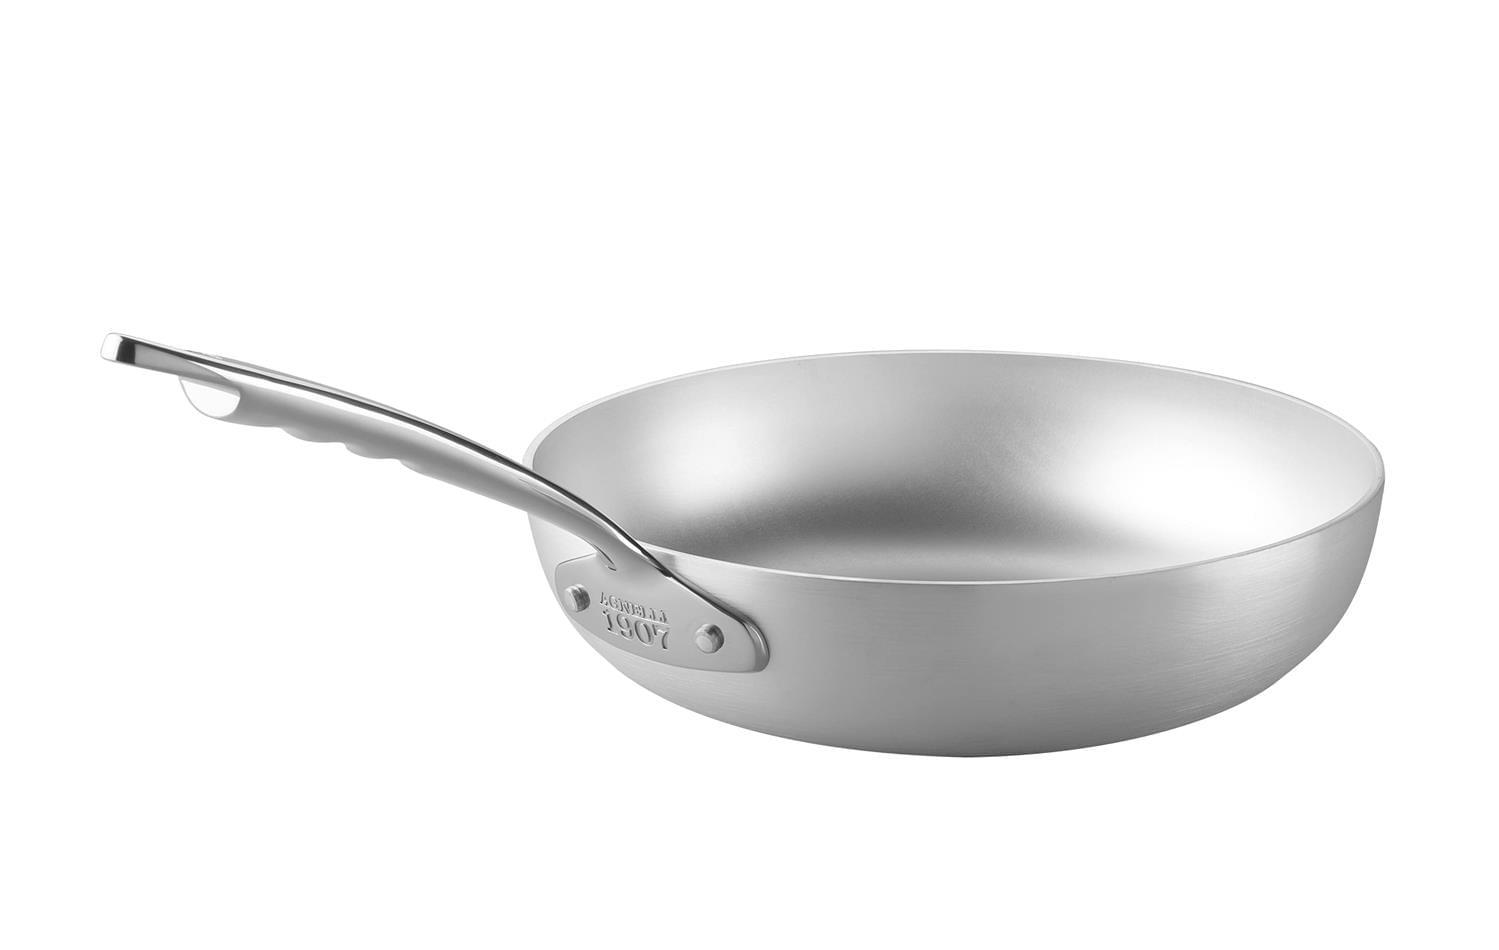 Pentole Agnelli Stainless Steel Fry Pan